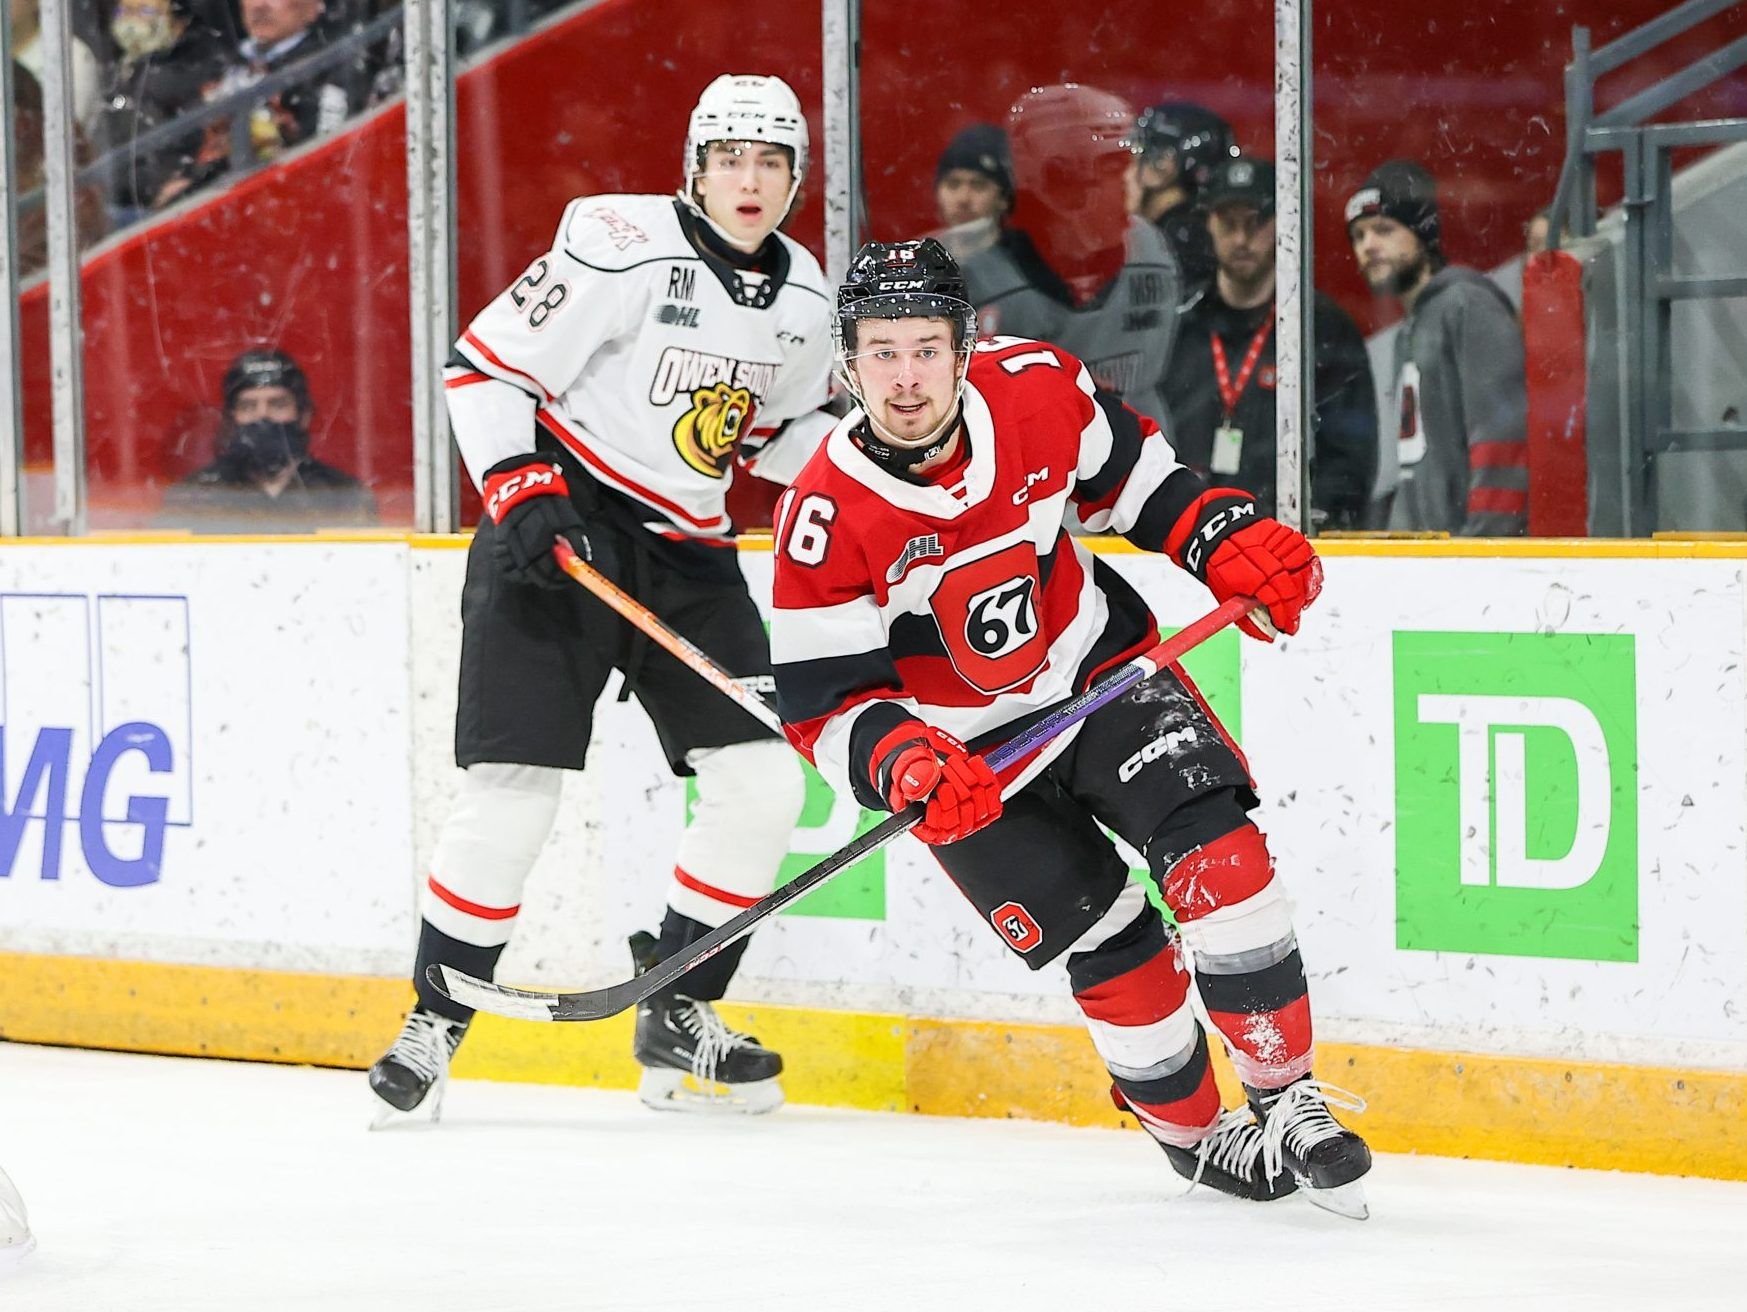 STARRING ROLE Logan Morrison a hit in Ottawa 67s debut after big OHL trade Ottawa Sun